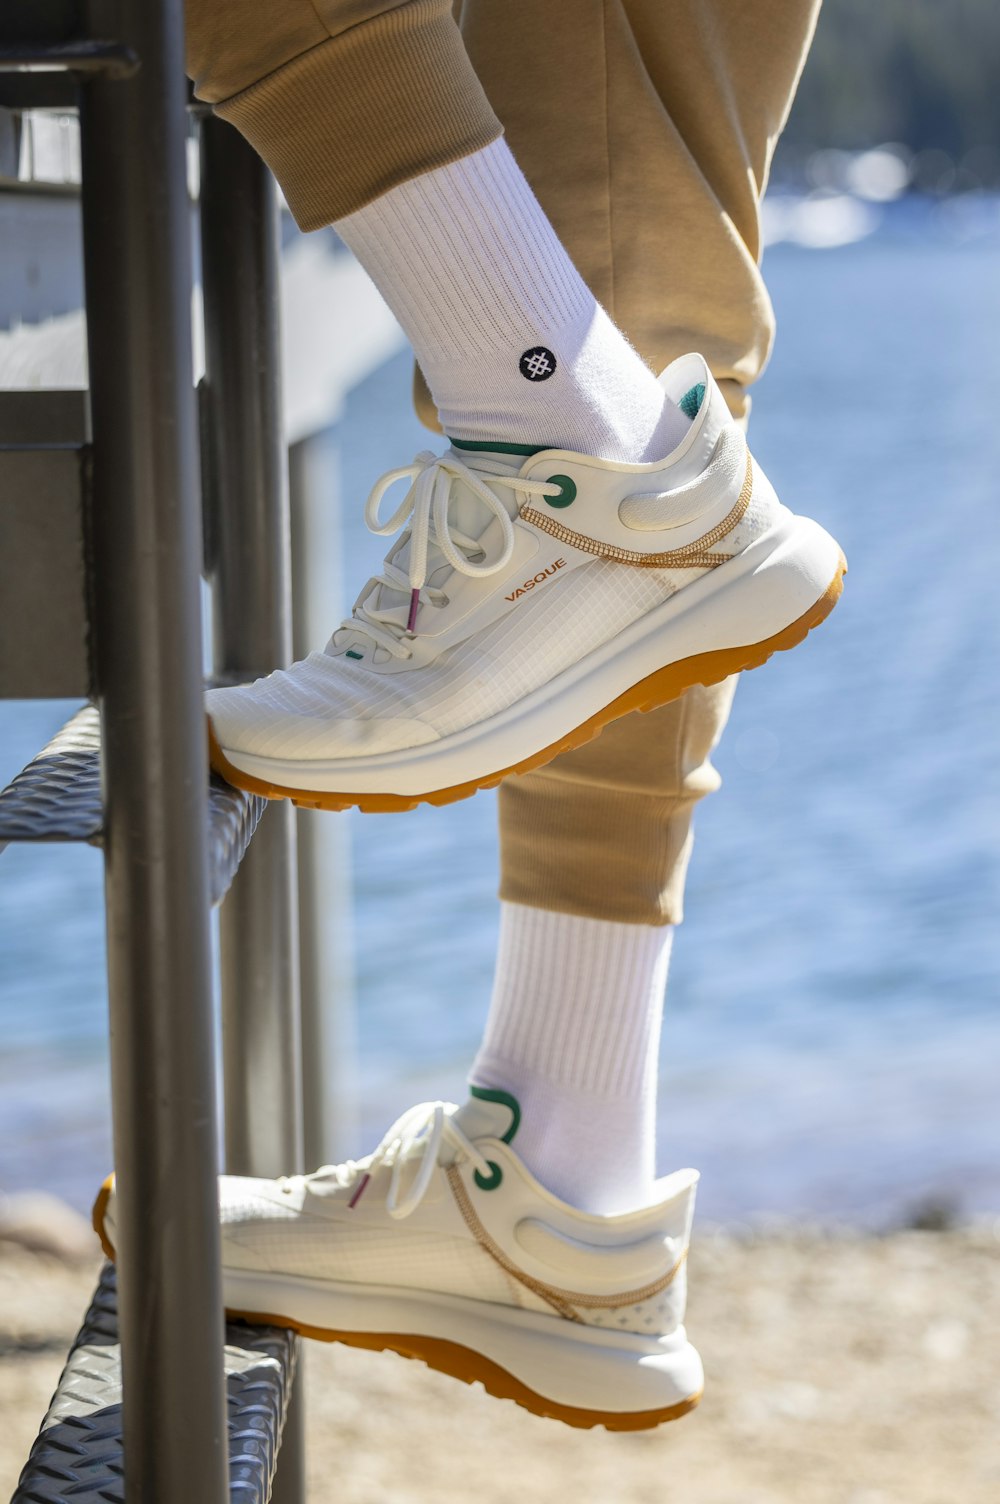 a person wearing white tennis shoes and tan pants